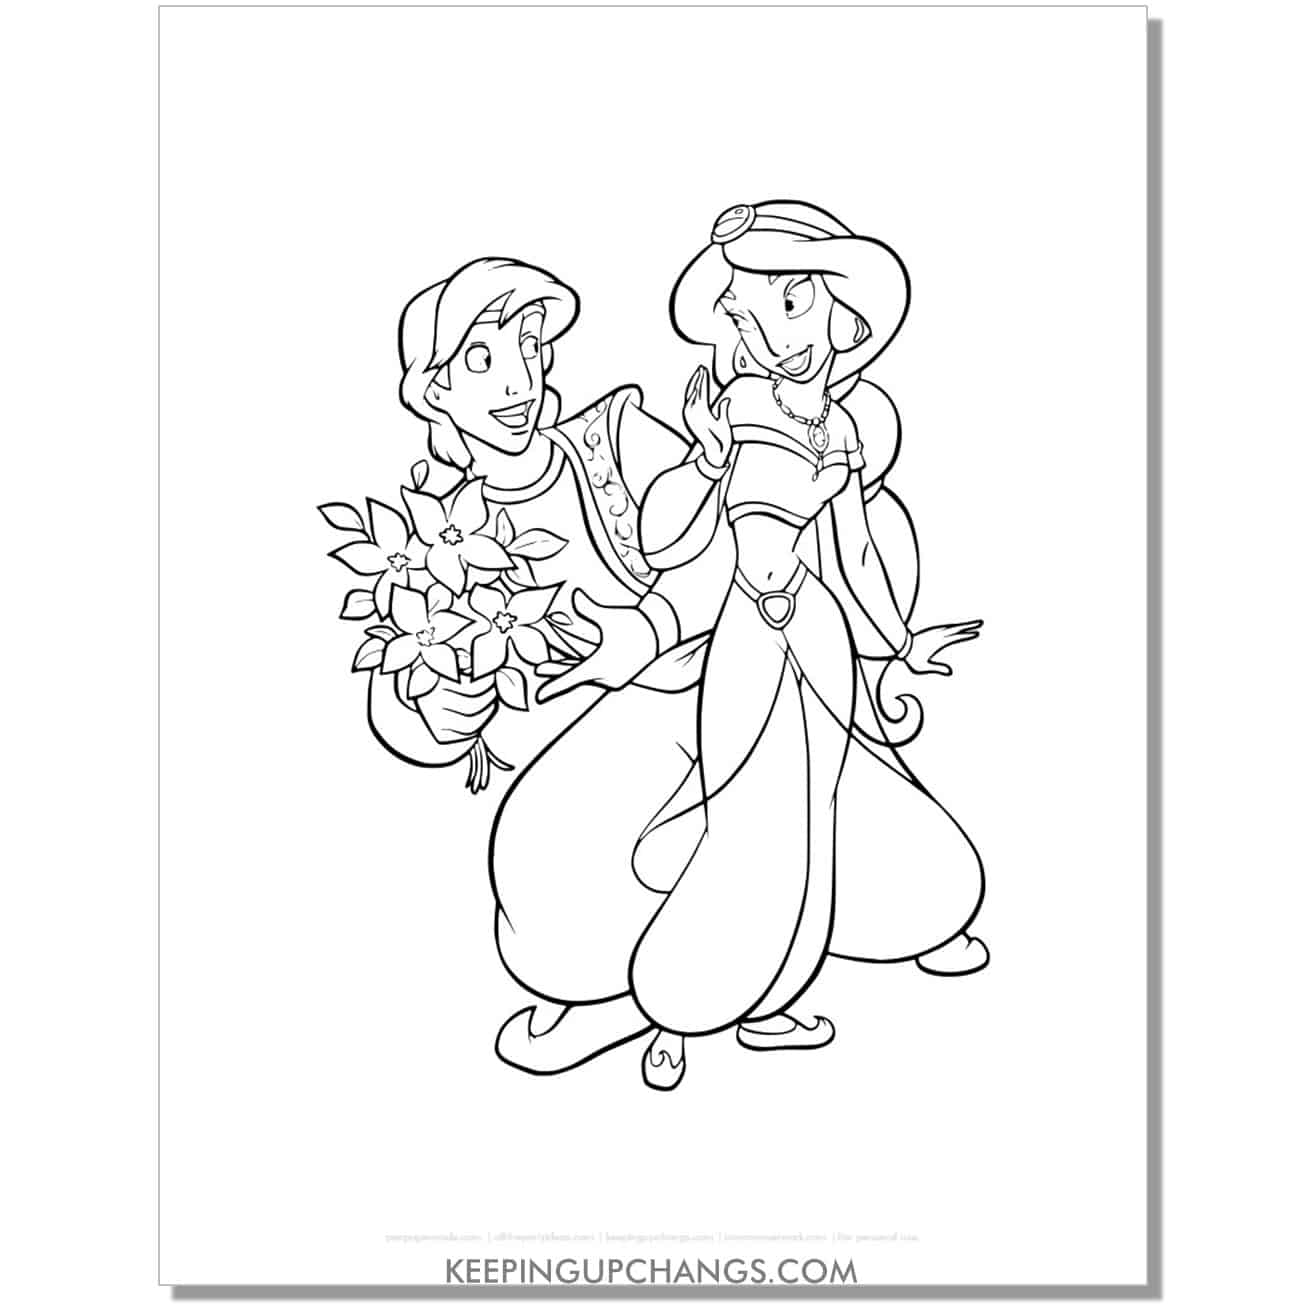 jasmine receives flowers from aladdin coloring page, sheet.